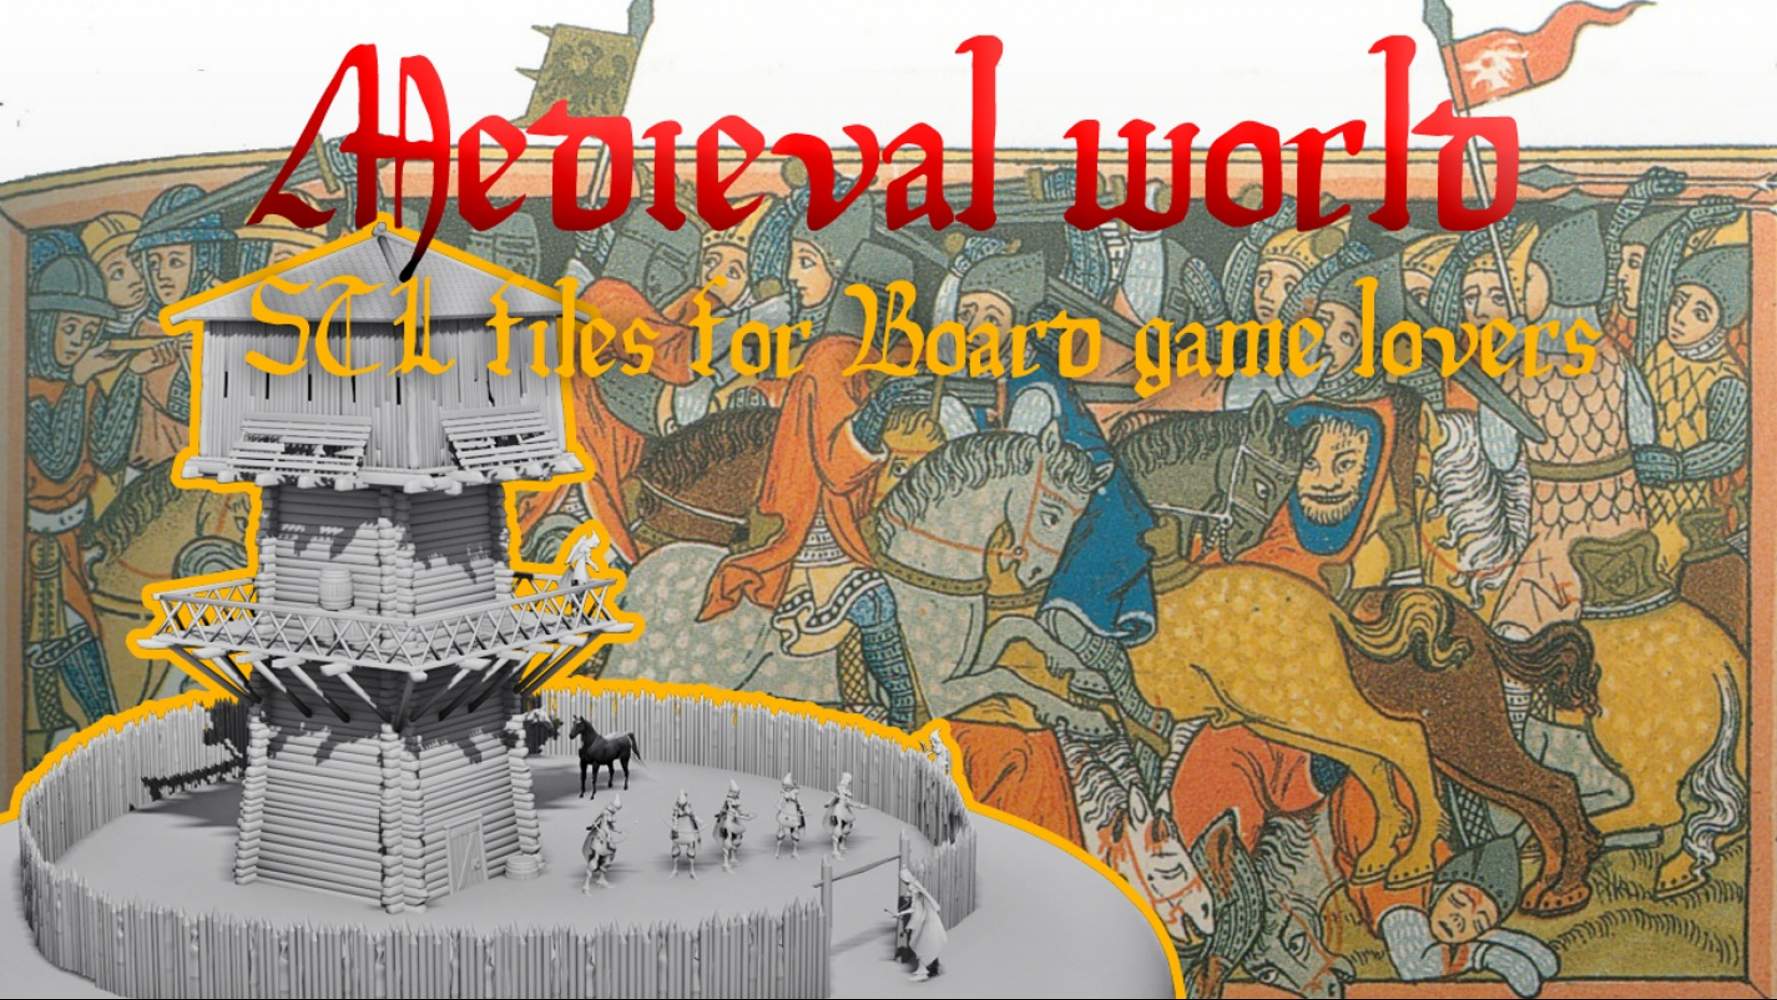 Medieval world's Cover